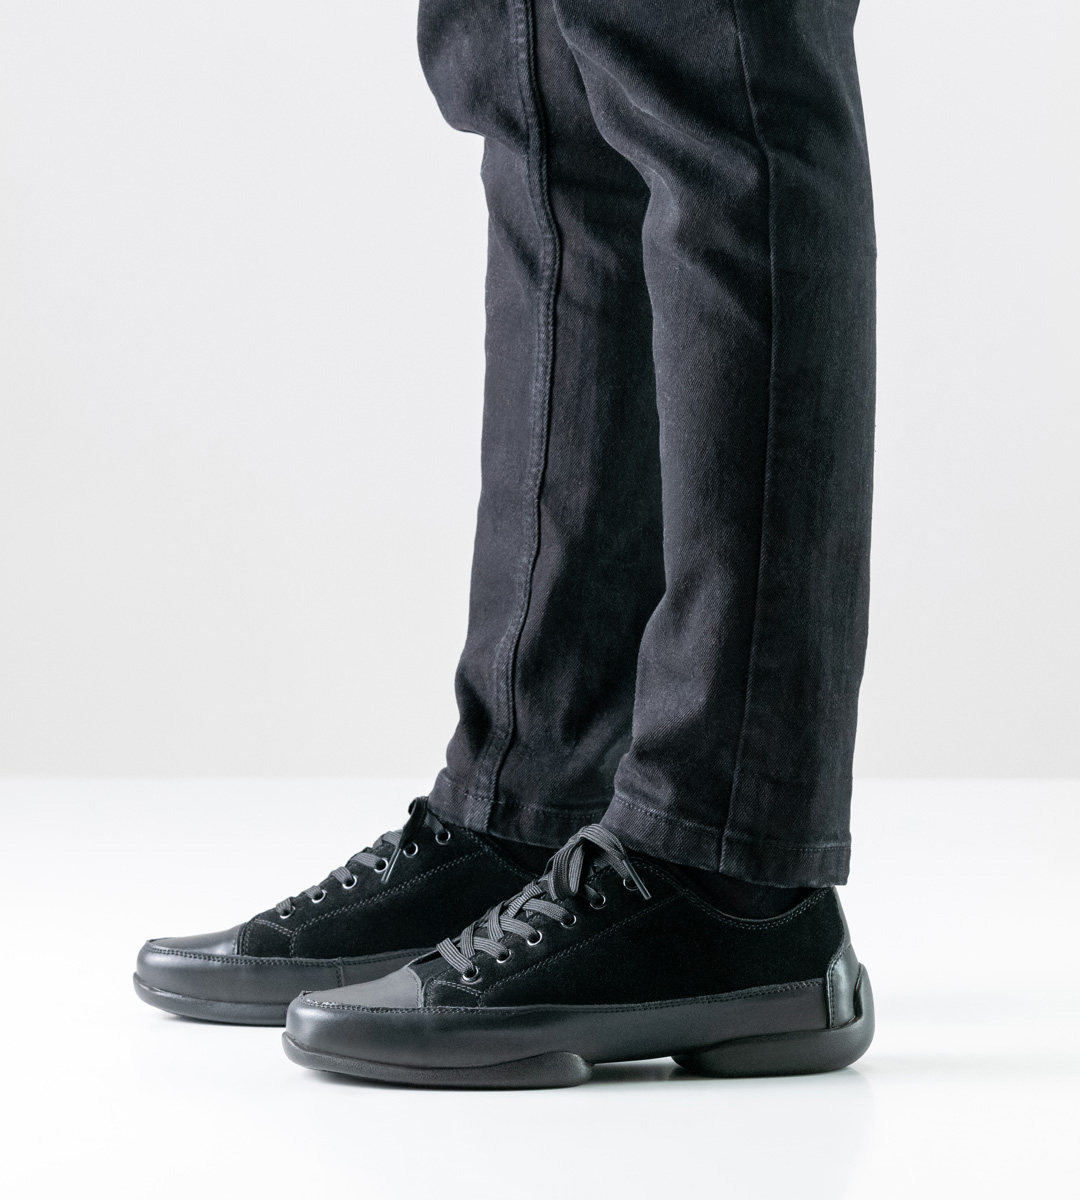 Side view of the black men's sneaker from Suny with split sole